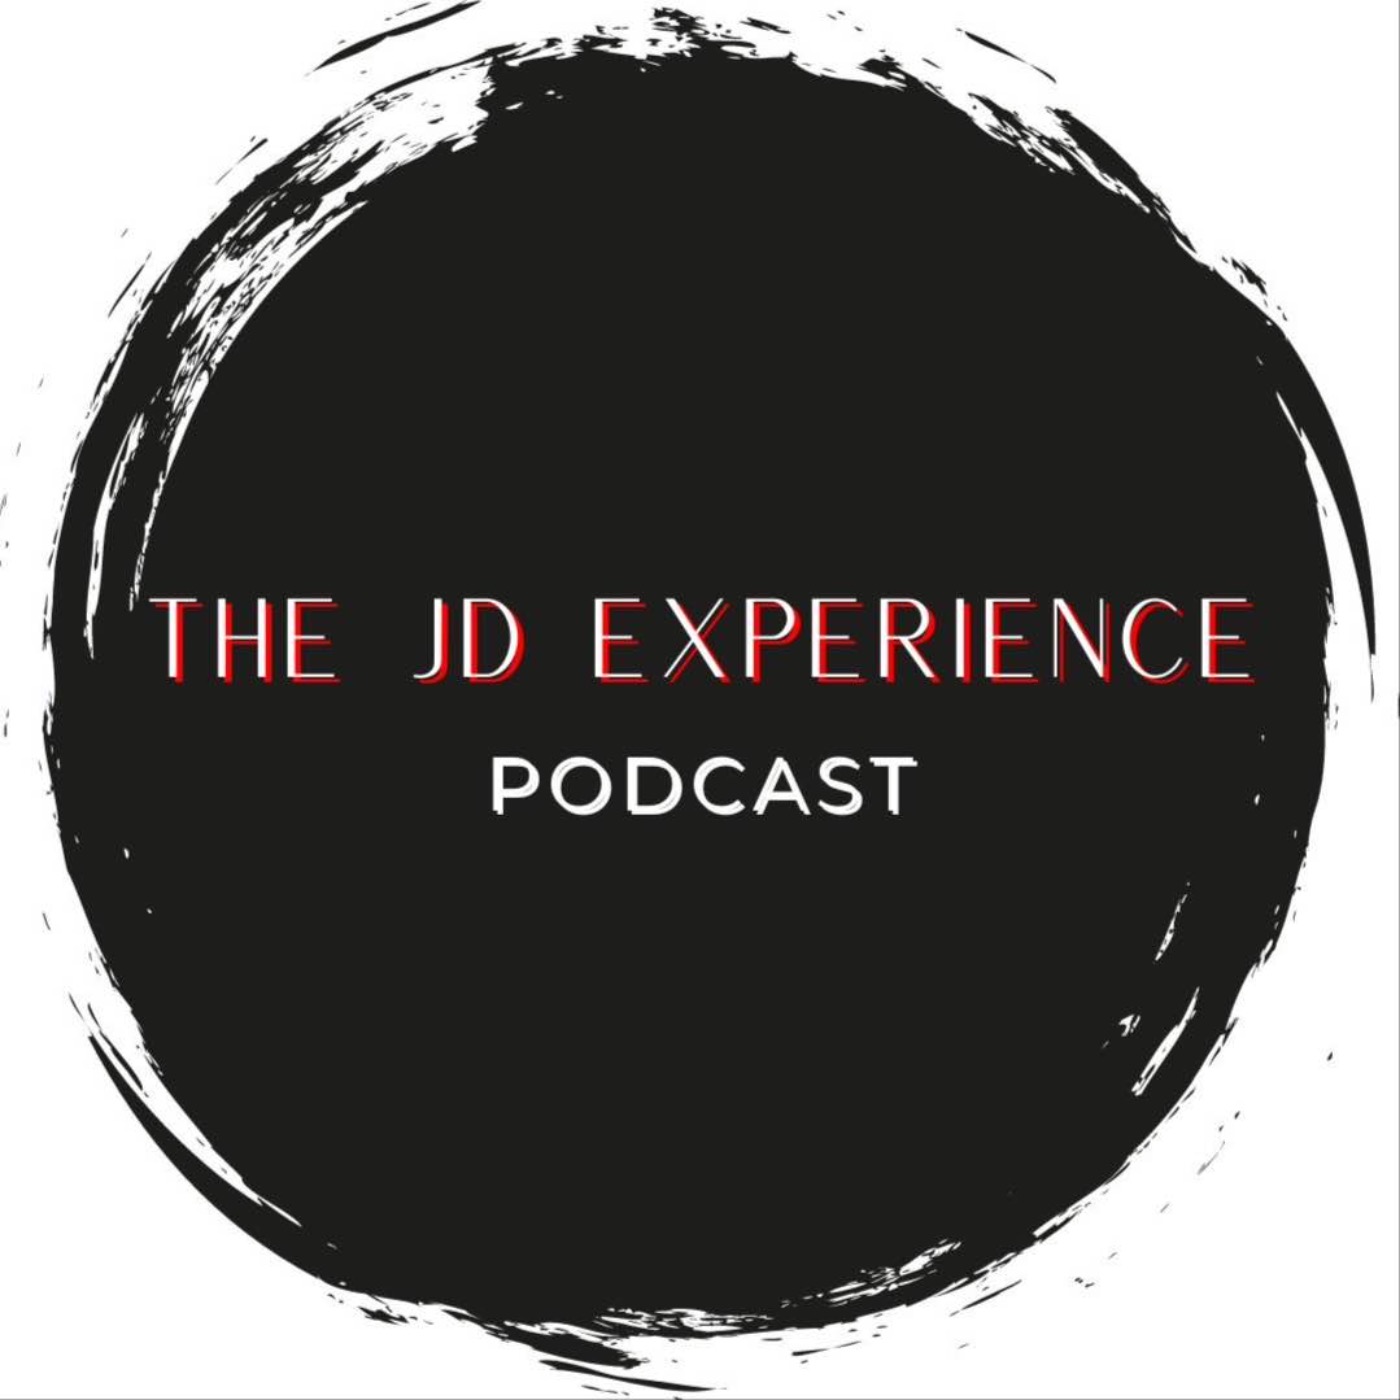 THE JD EXPERIENCE PODCAST EPISODE 7